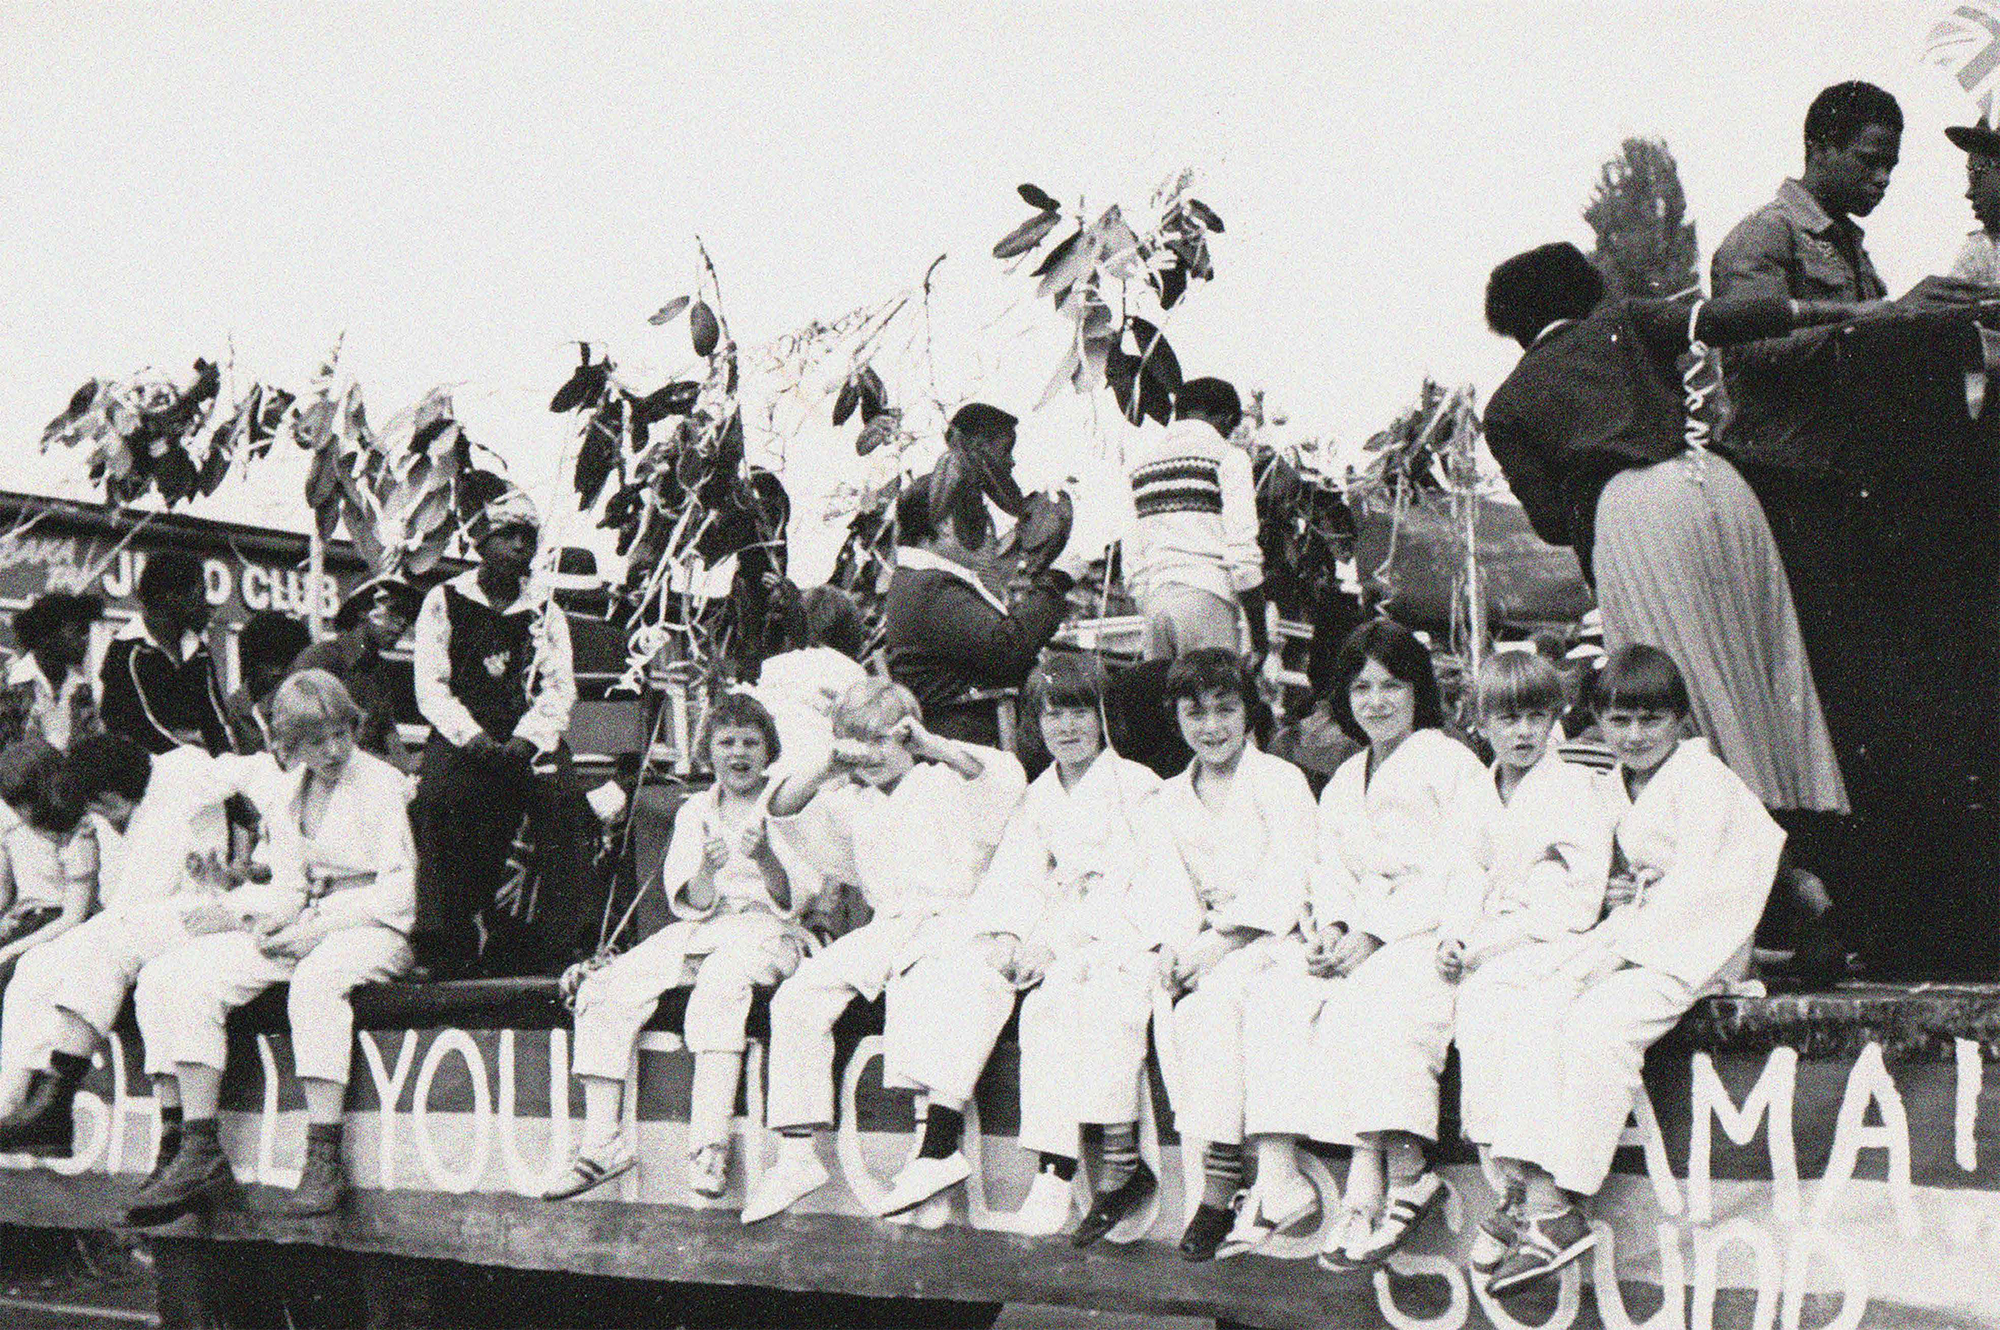 A black and white photograph of a stage with text painted on the side reading, "Foleshill Youth Club Jamaican Sound". There are Black adults and children on the stage setting up, presumably for a concert or party, while a group of white children sits on the edge of the stage, posing for the camera.